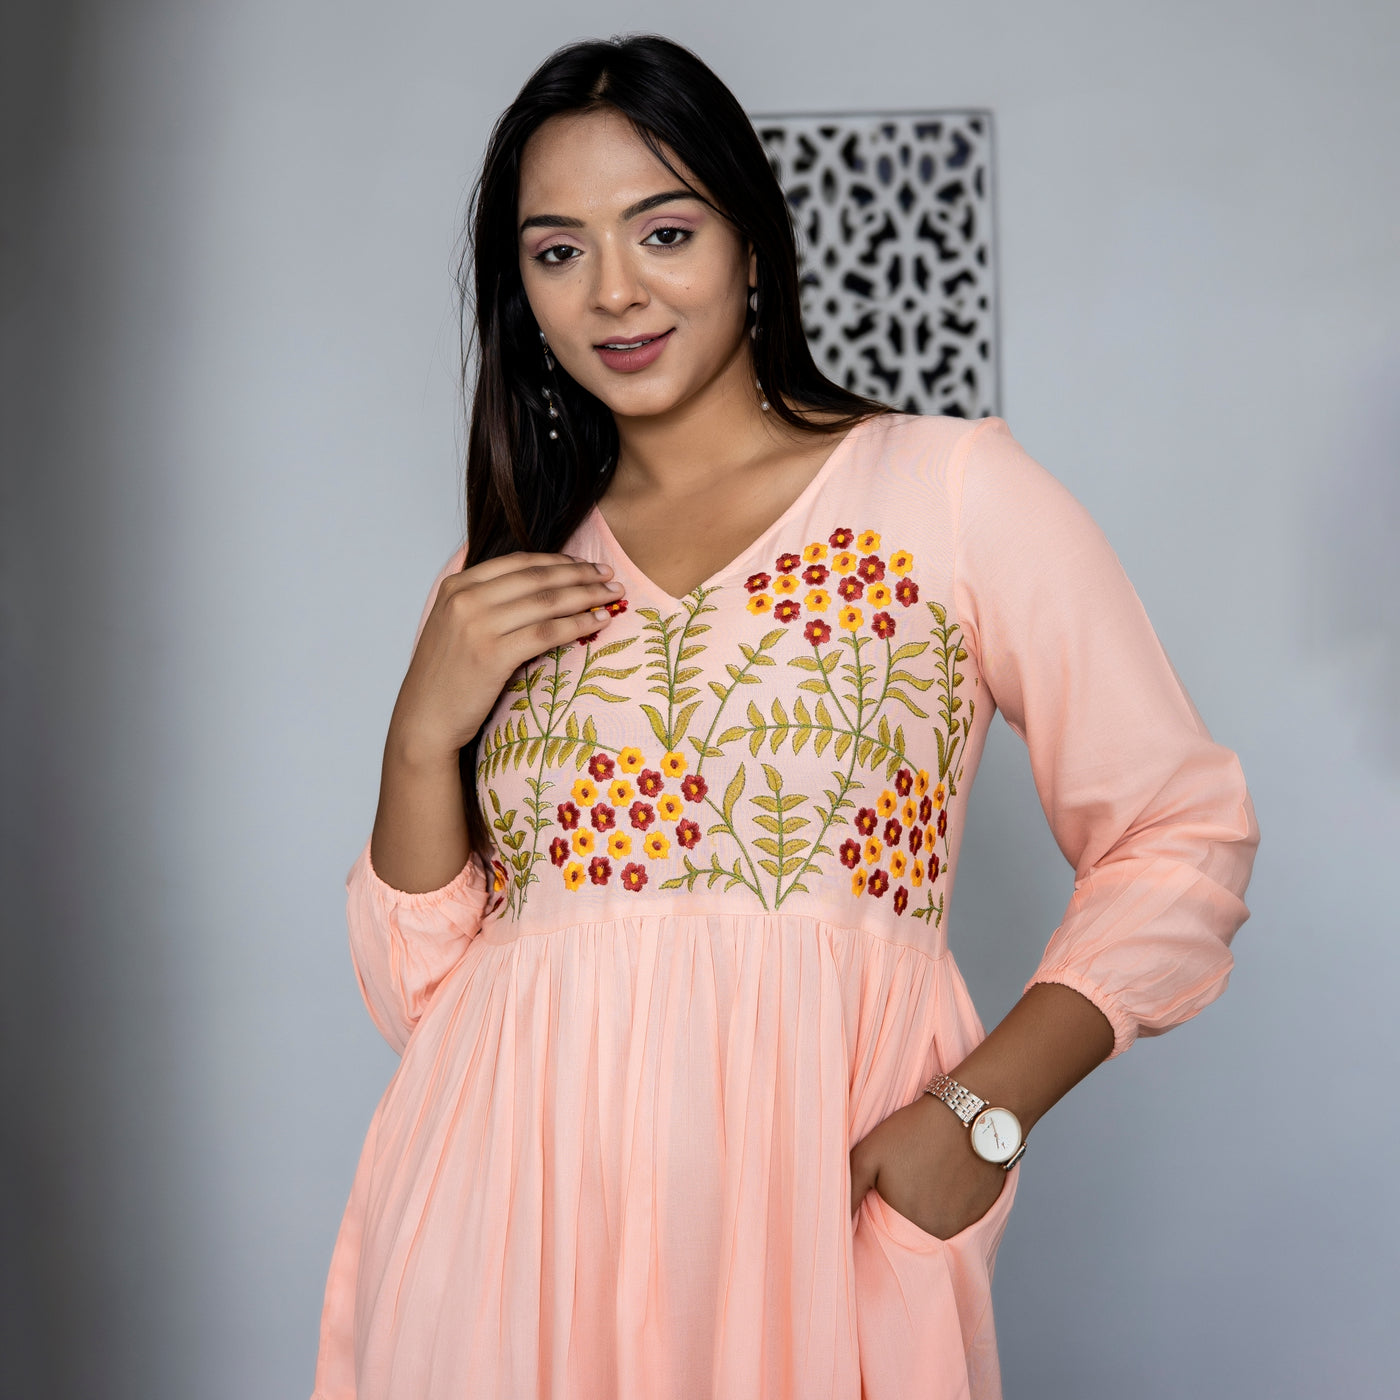 Rayon Peach Embroidered Mom and Daughter Tiered Dresses